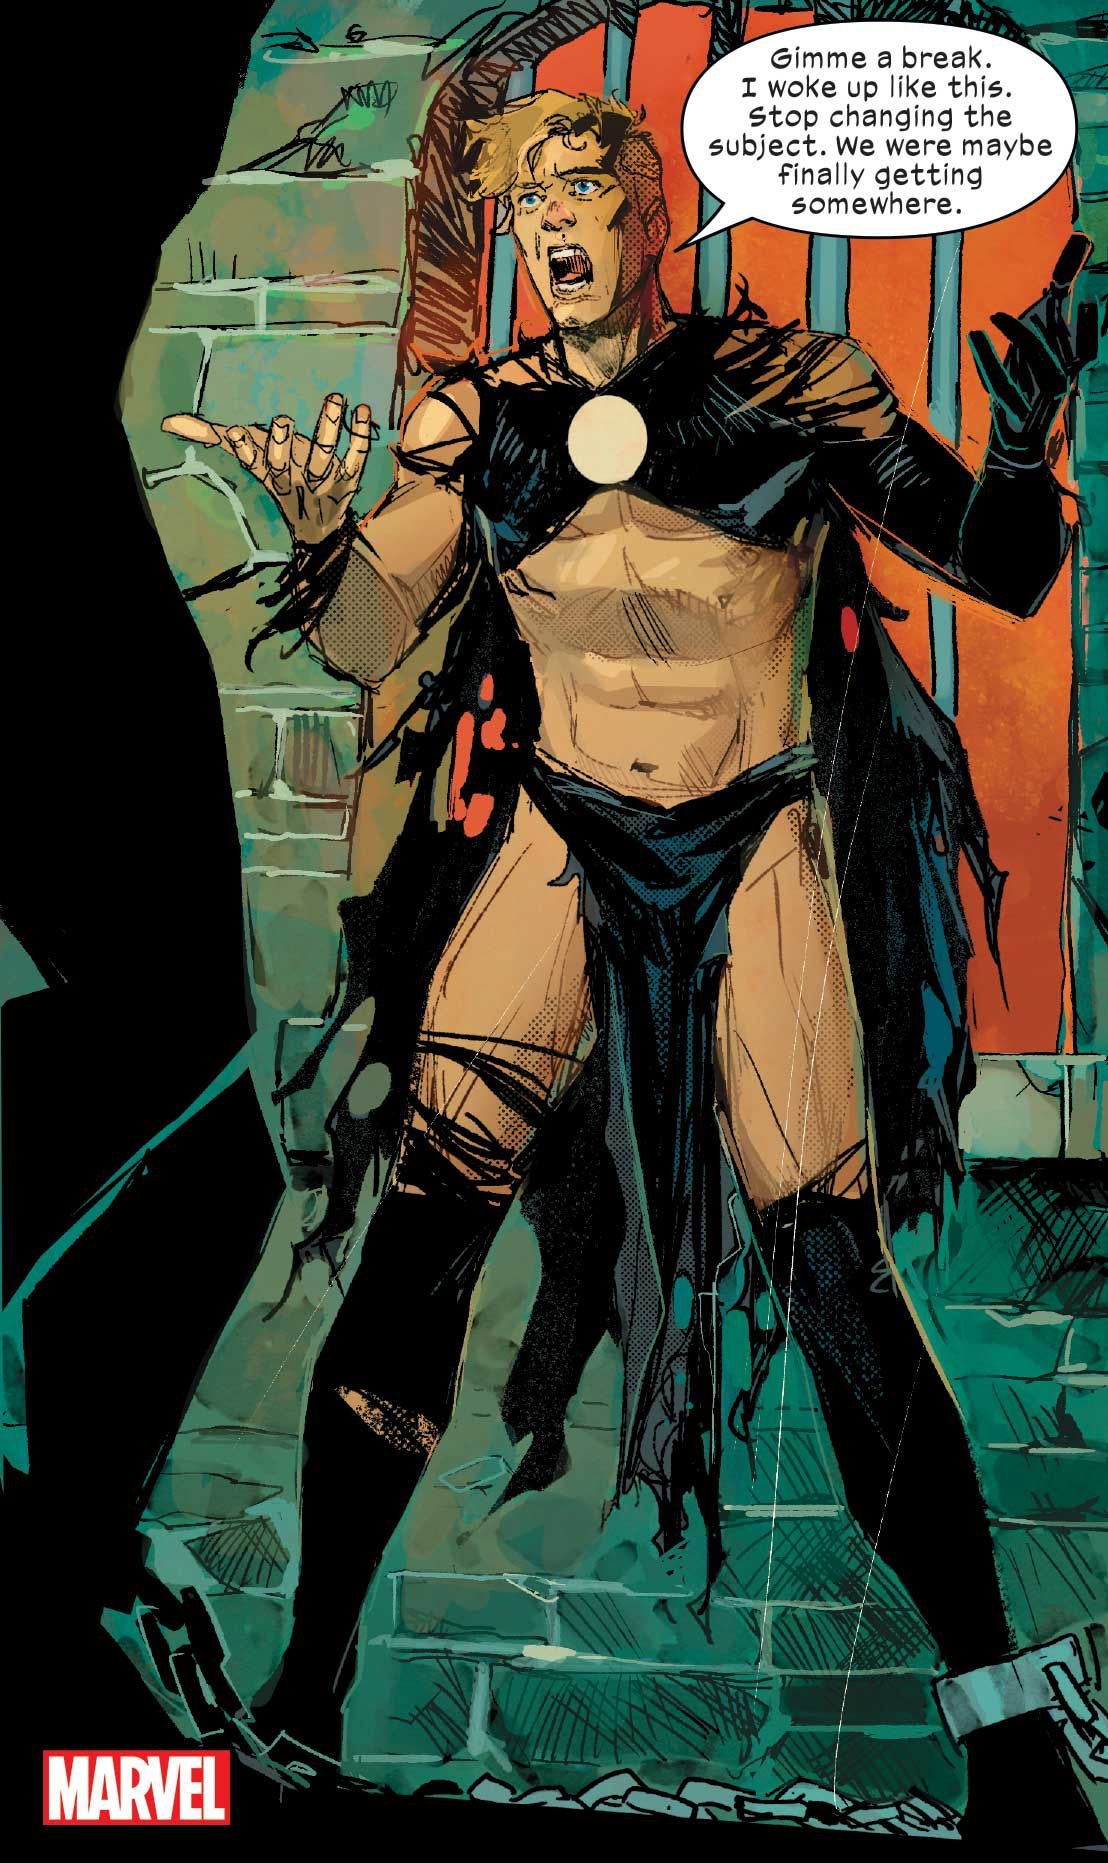 Havok in shredded black robes standing in front of prison bars saying, “Gimmie a break. I woke up like this. Stop changing the subject. We were maybe finally getting somewhere.”